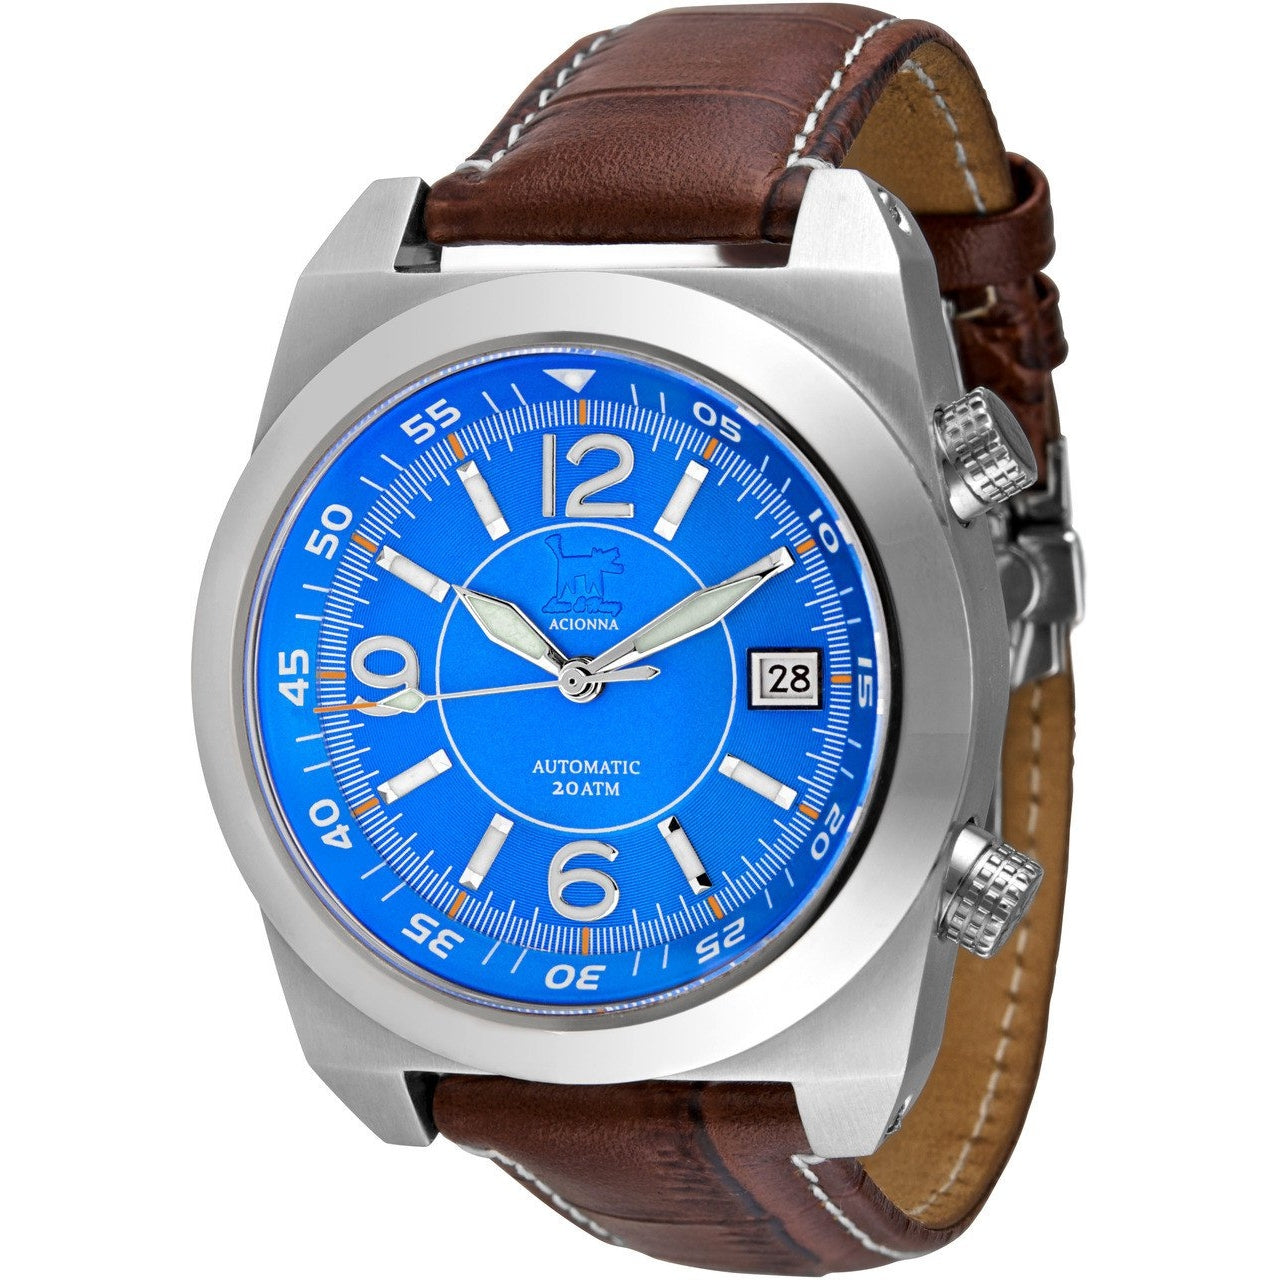 Lew and Huey Acionna Automatic Watch (Blue, White & Orange) - Watchfinder General - UK suppliers of Russian Vostok Parnis Watches MWC G10
 - 2